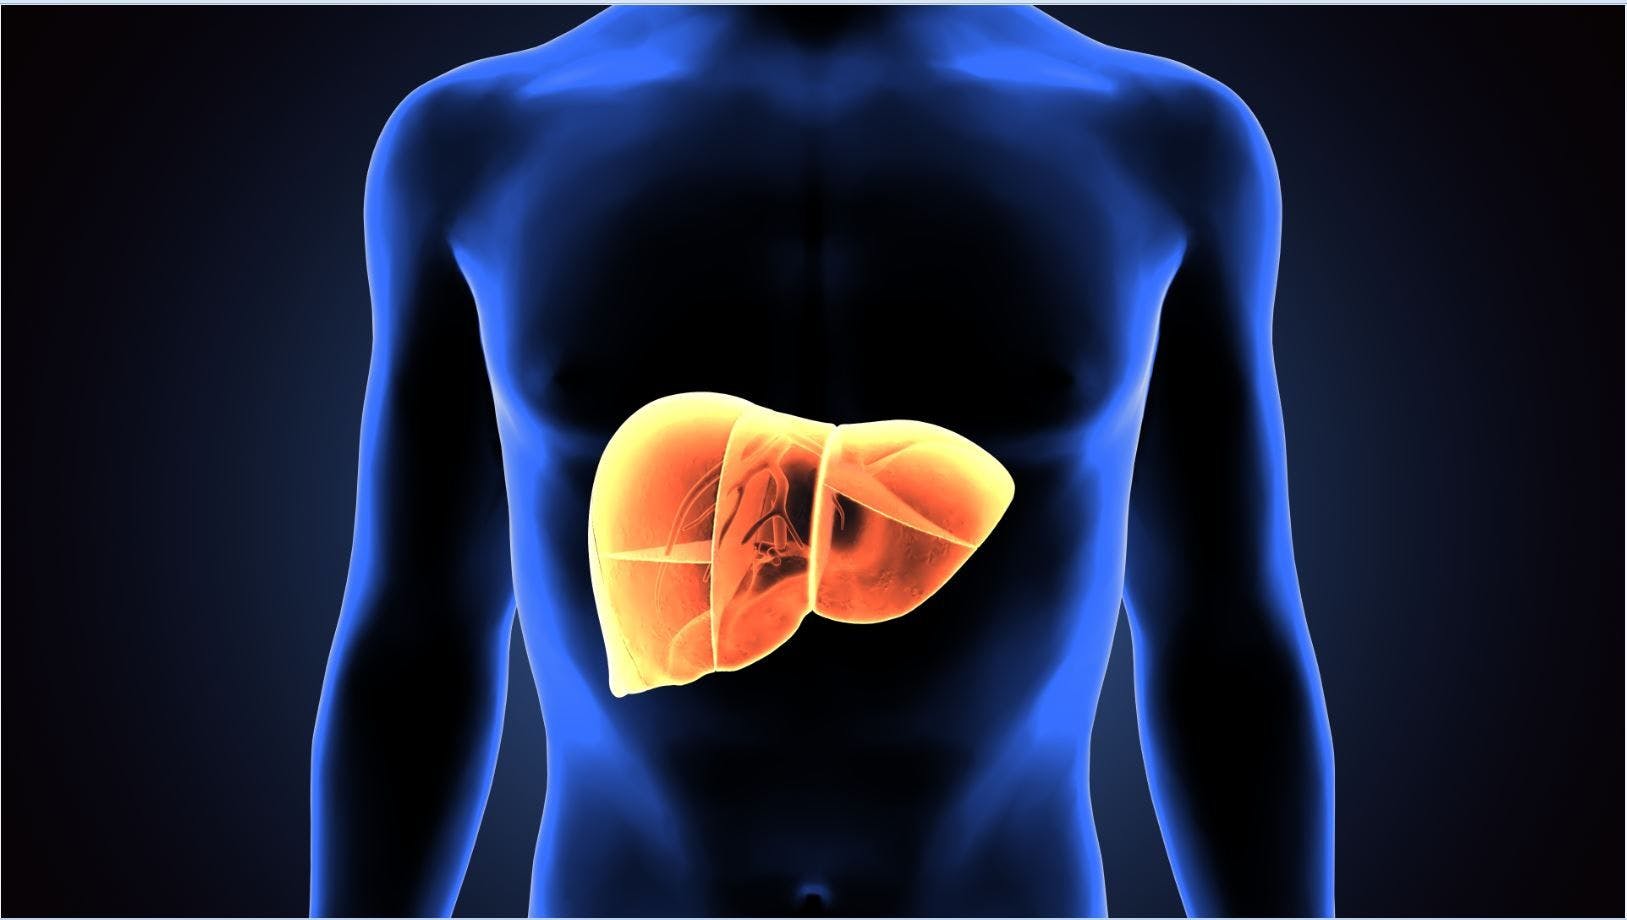 Improved HbA1c in Adults with T2D Had Beneficial Impact on NAFLD, According to New Study